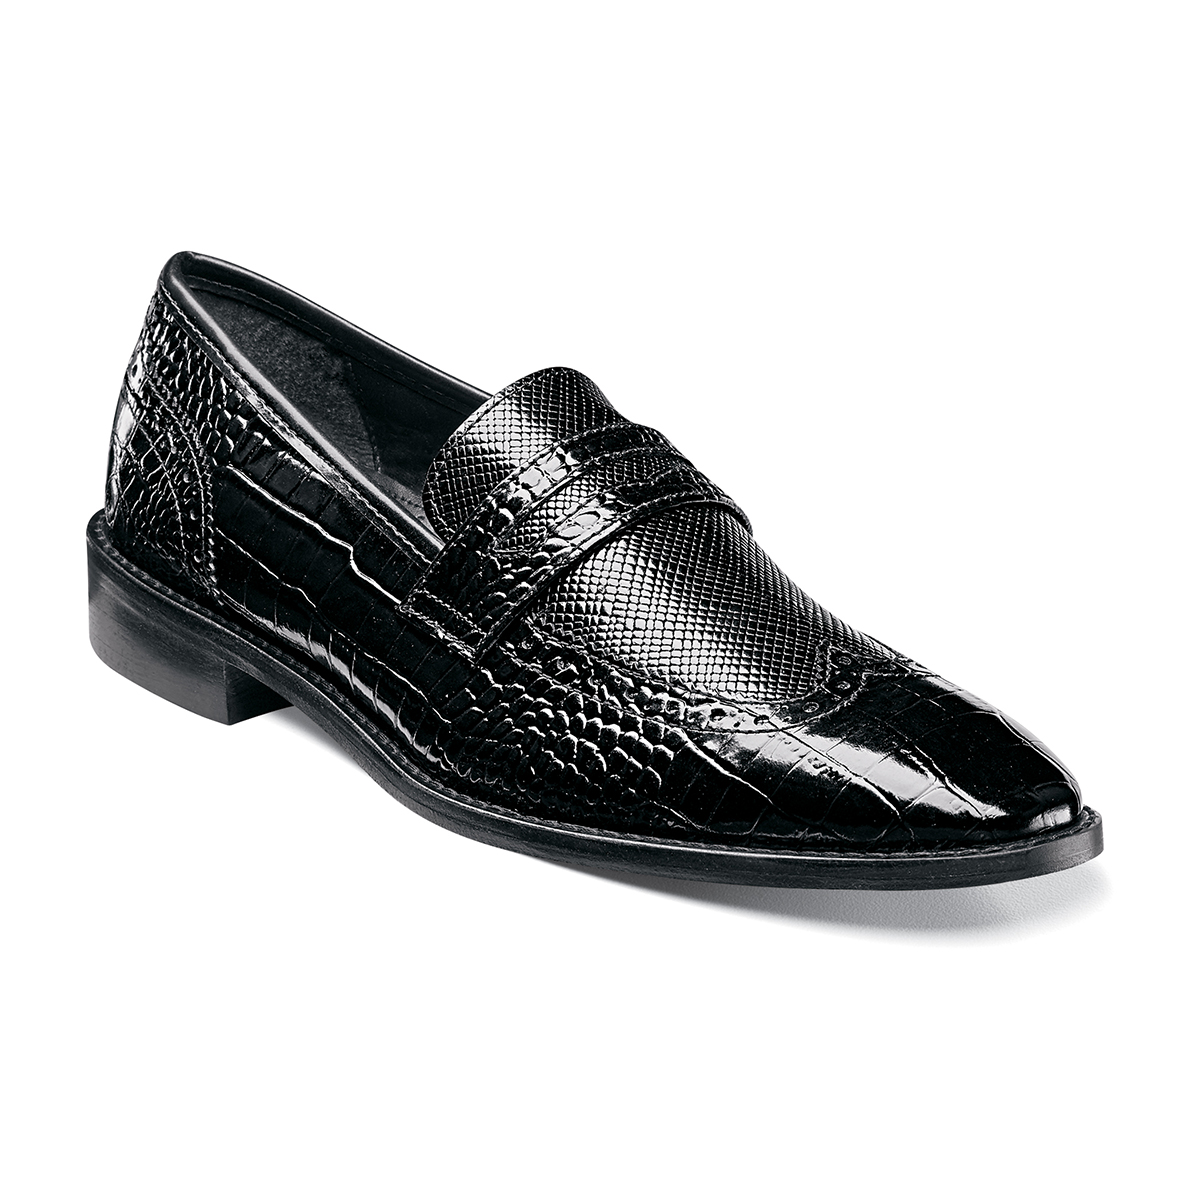 Clearance Shoes | Black ingtip Penny Loafer Slip On | Stacy Adams Valenti